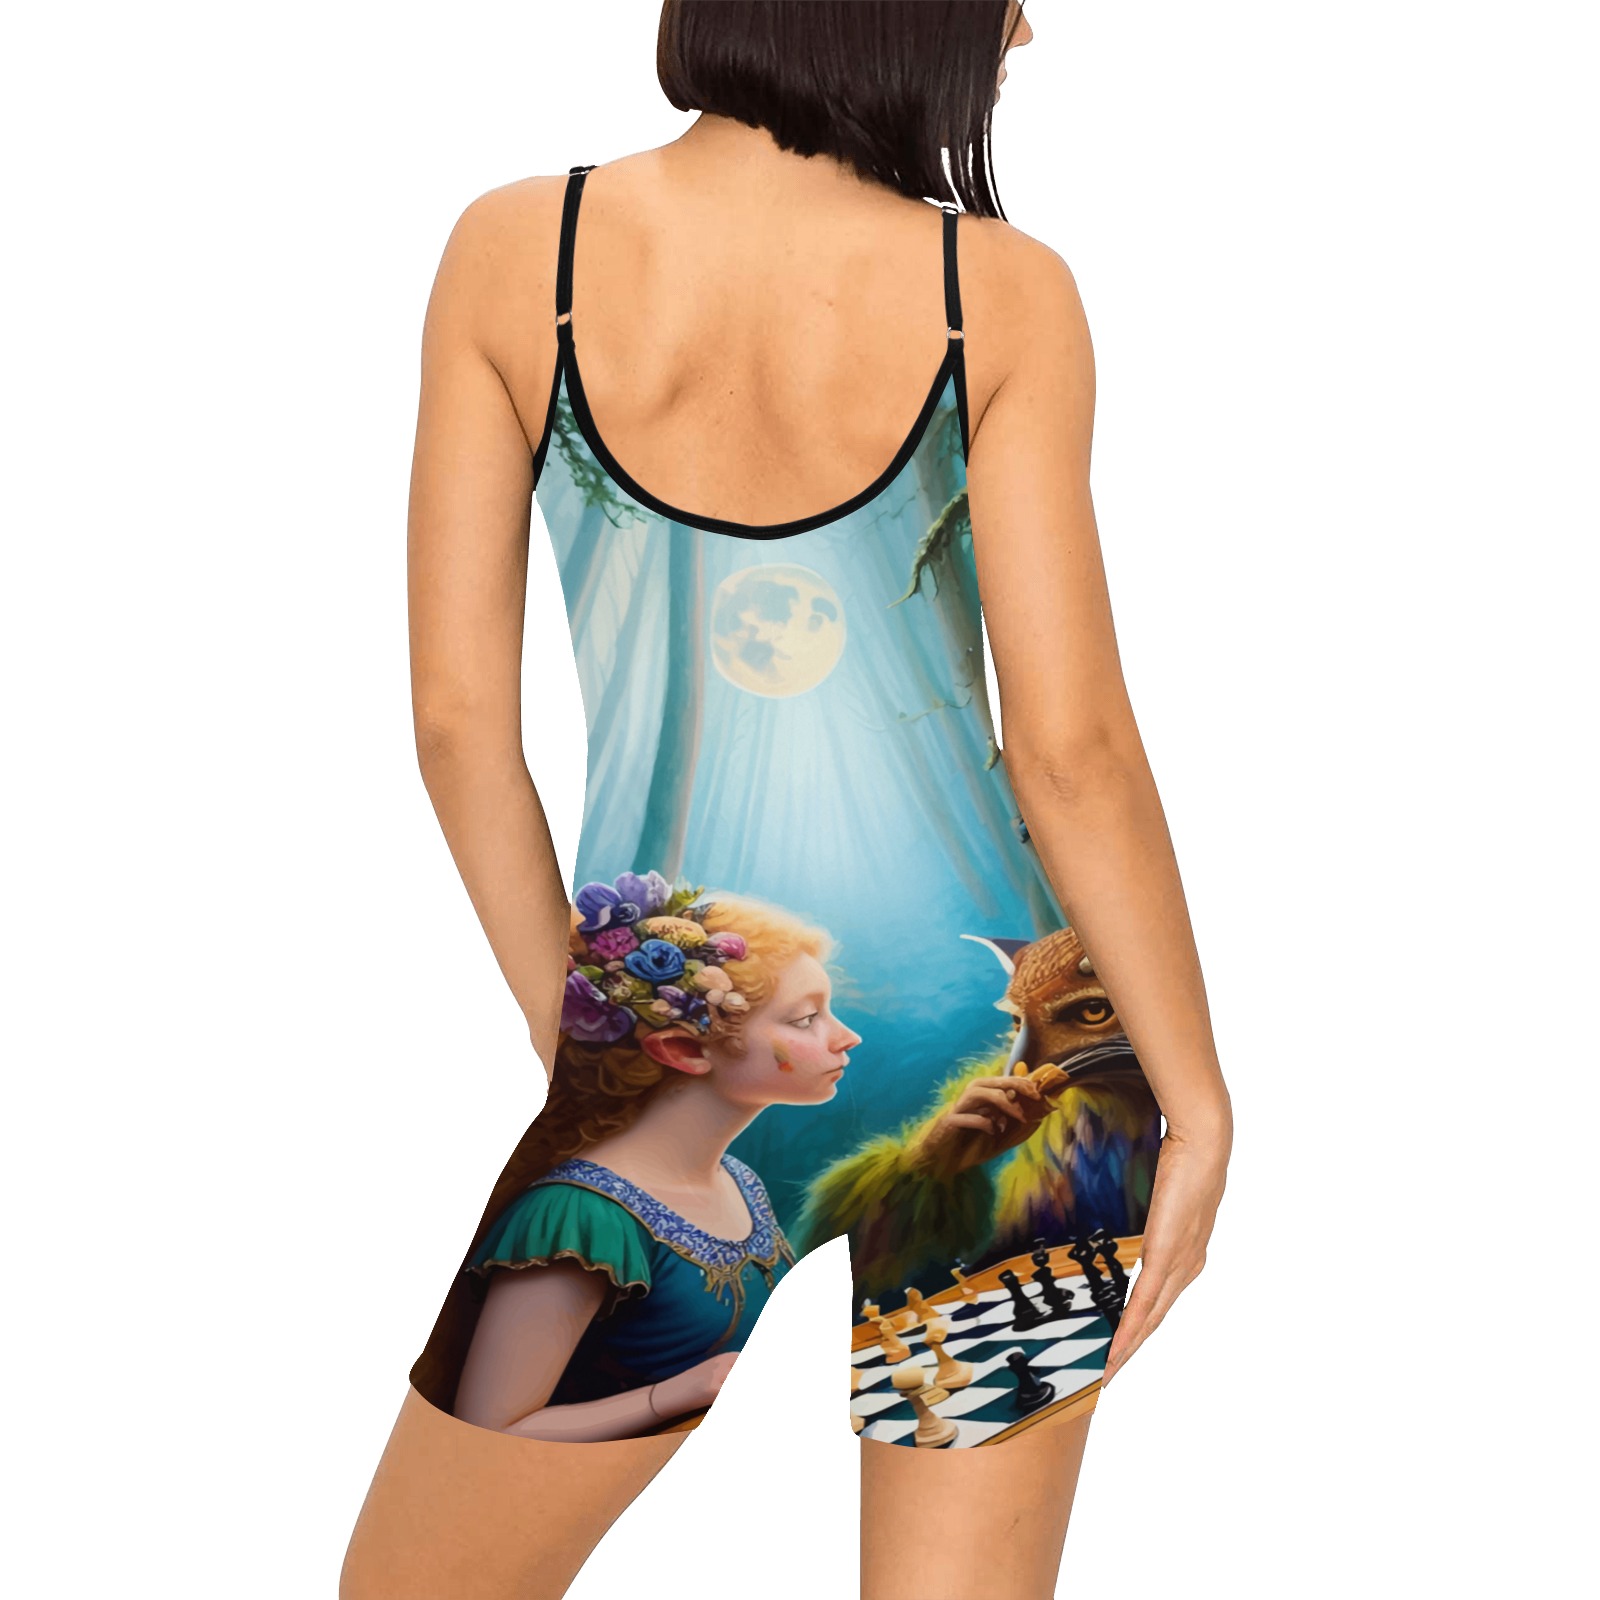 The Call of the Game 6_vectorized Women's Short Yoga Bodysuit